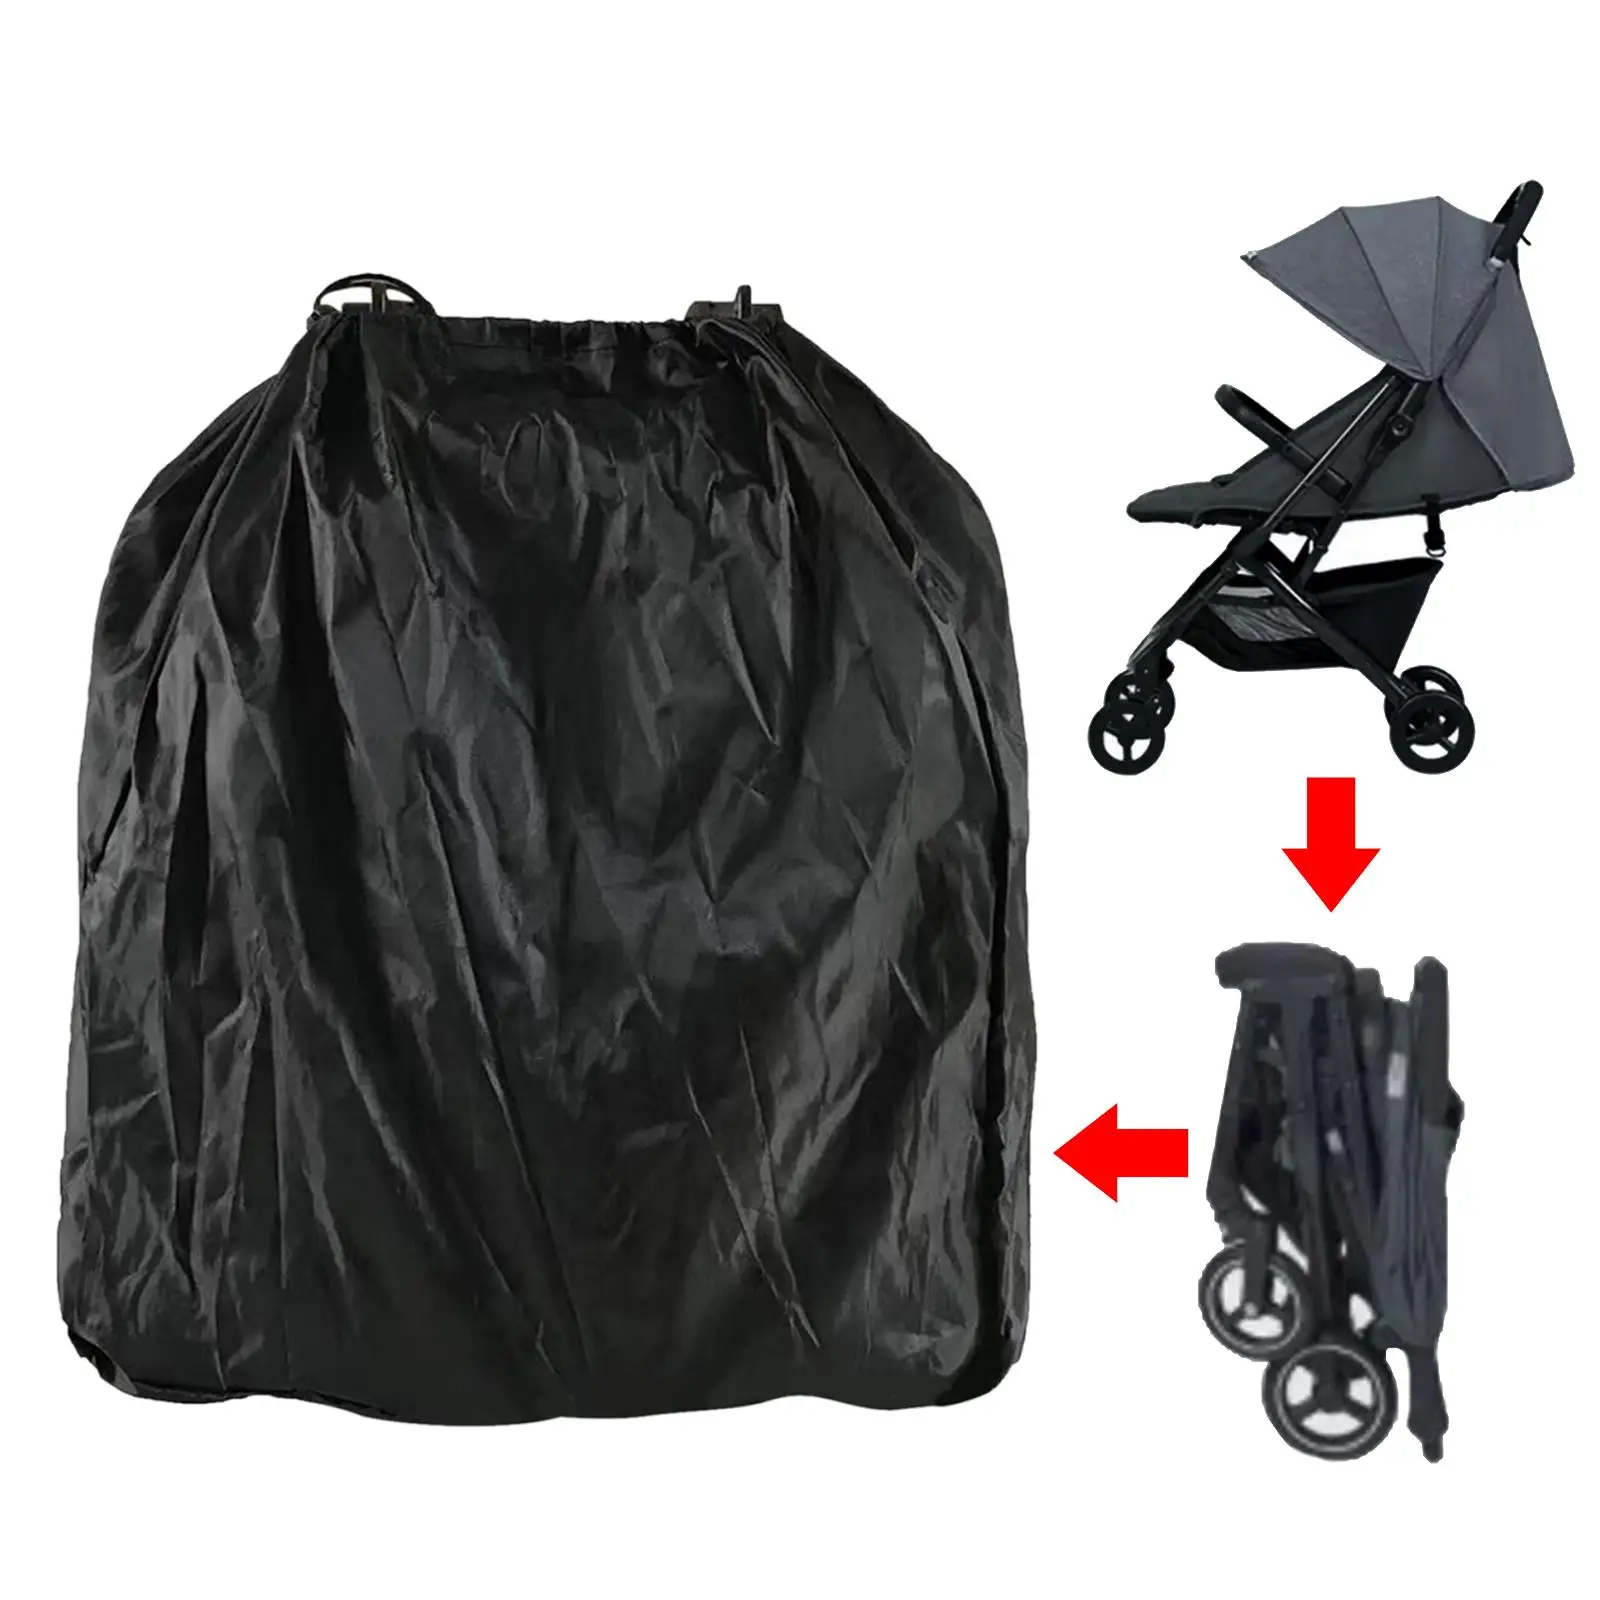 Air Travel Stroller Bag Carrying Oxford Cloth Drawstring Closure Stroller Storage Bag for Airports Gate Check Bag Airplane